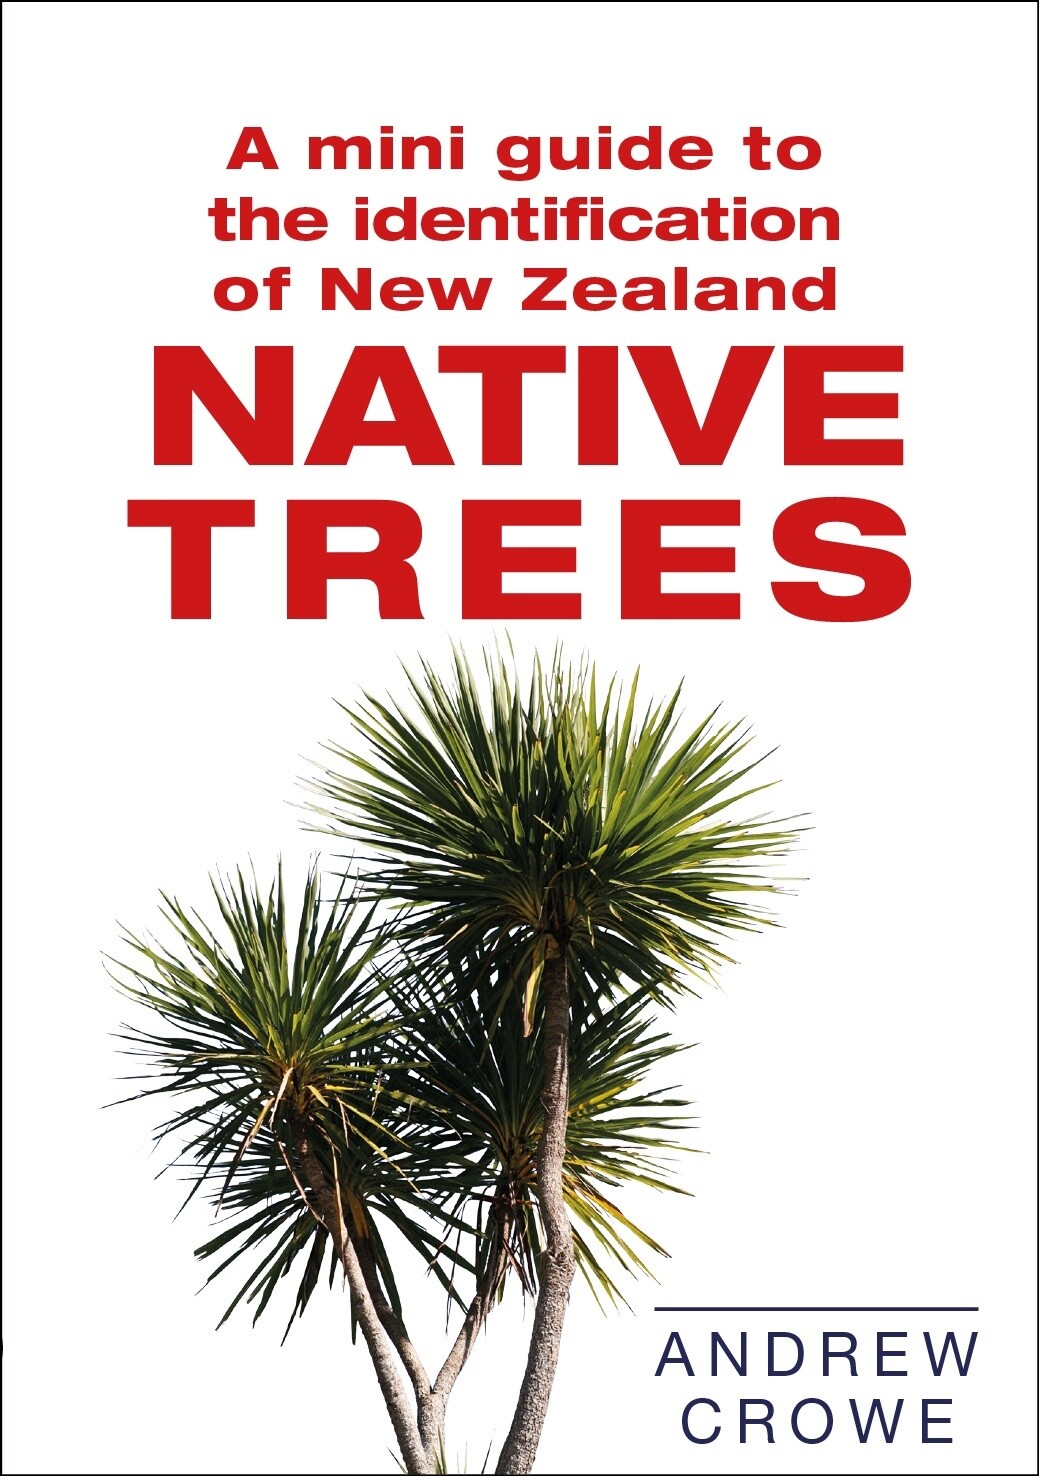 A Mini Guide to the Identification of New Zealand Native Trees by Andrew Crowe